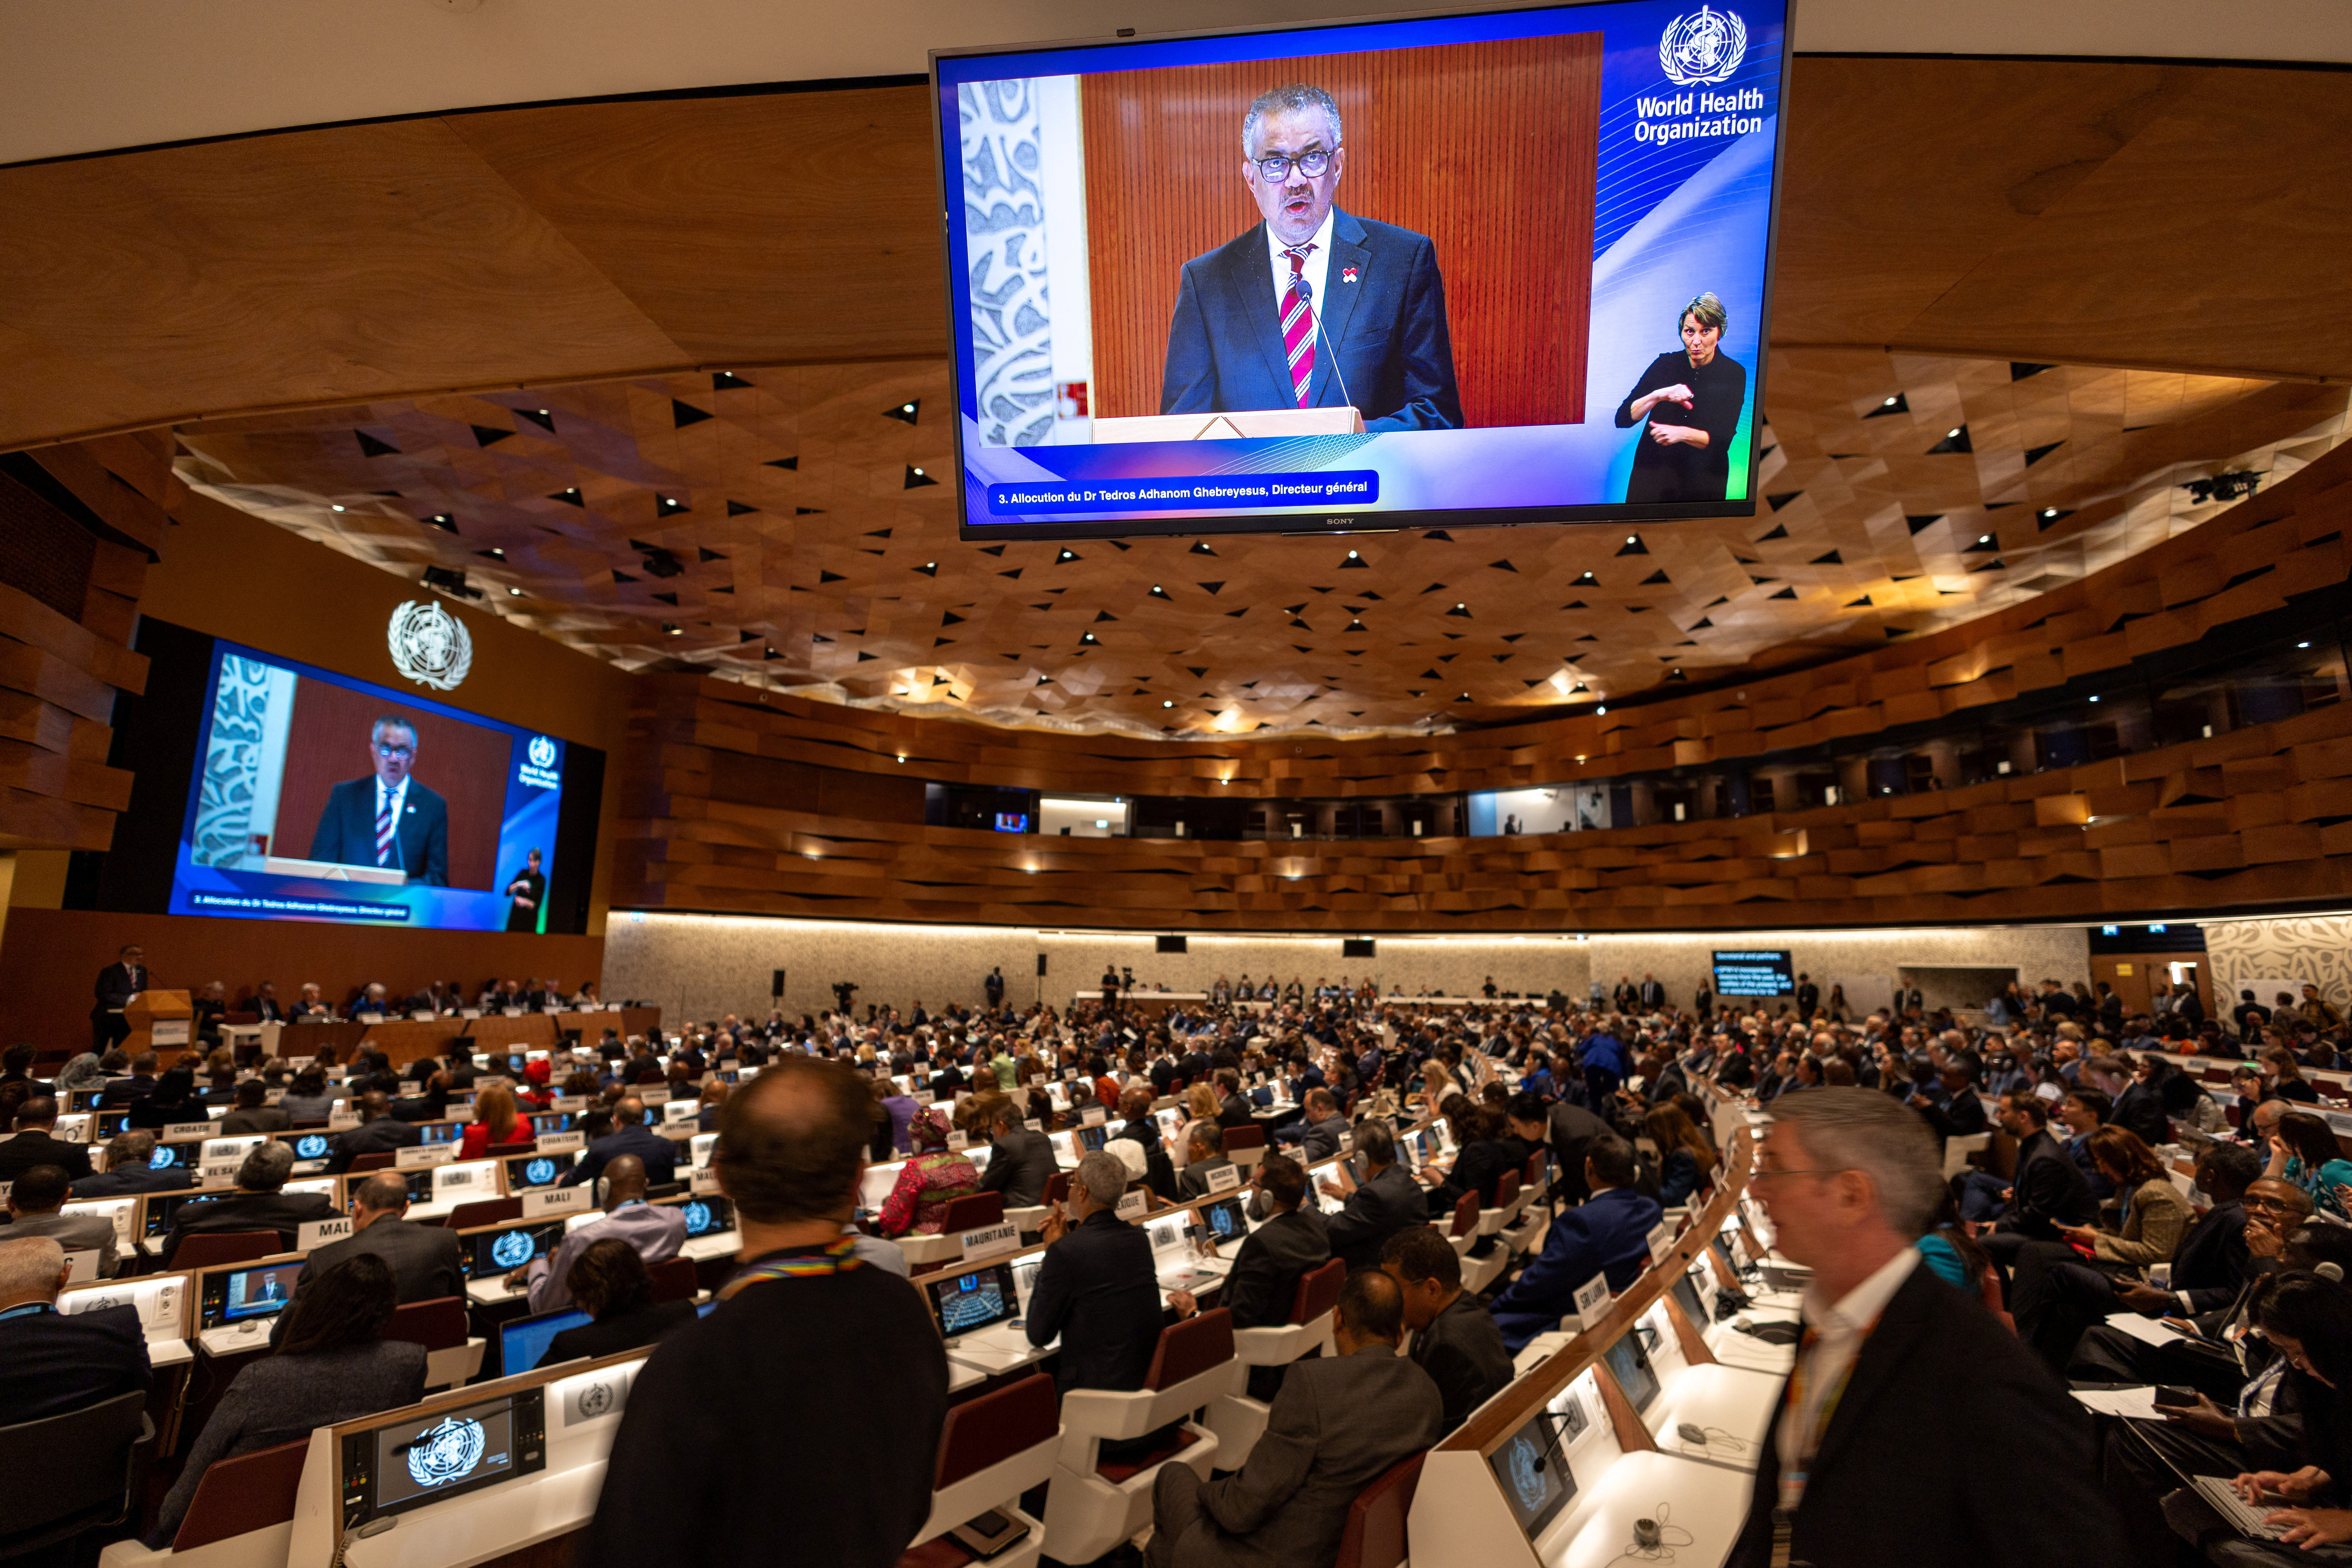 Director-General of WHO Dr. Tedros Adhanom Ghebreyesus attends the World Health Assembly in Geneva